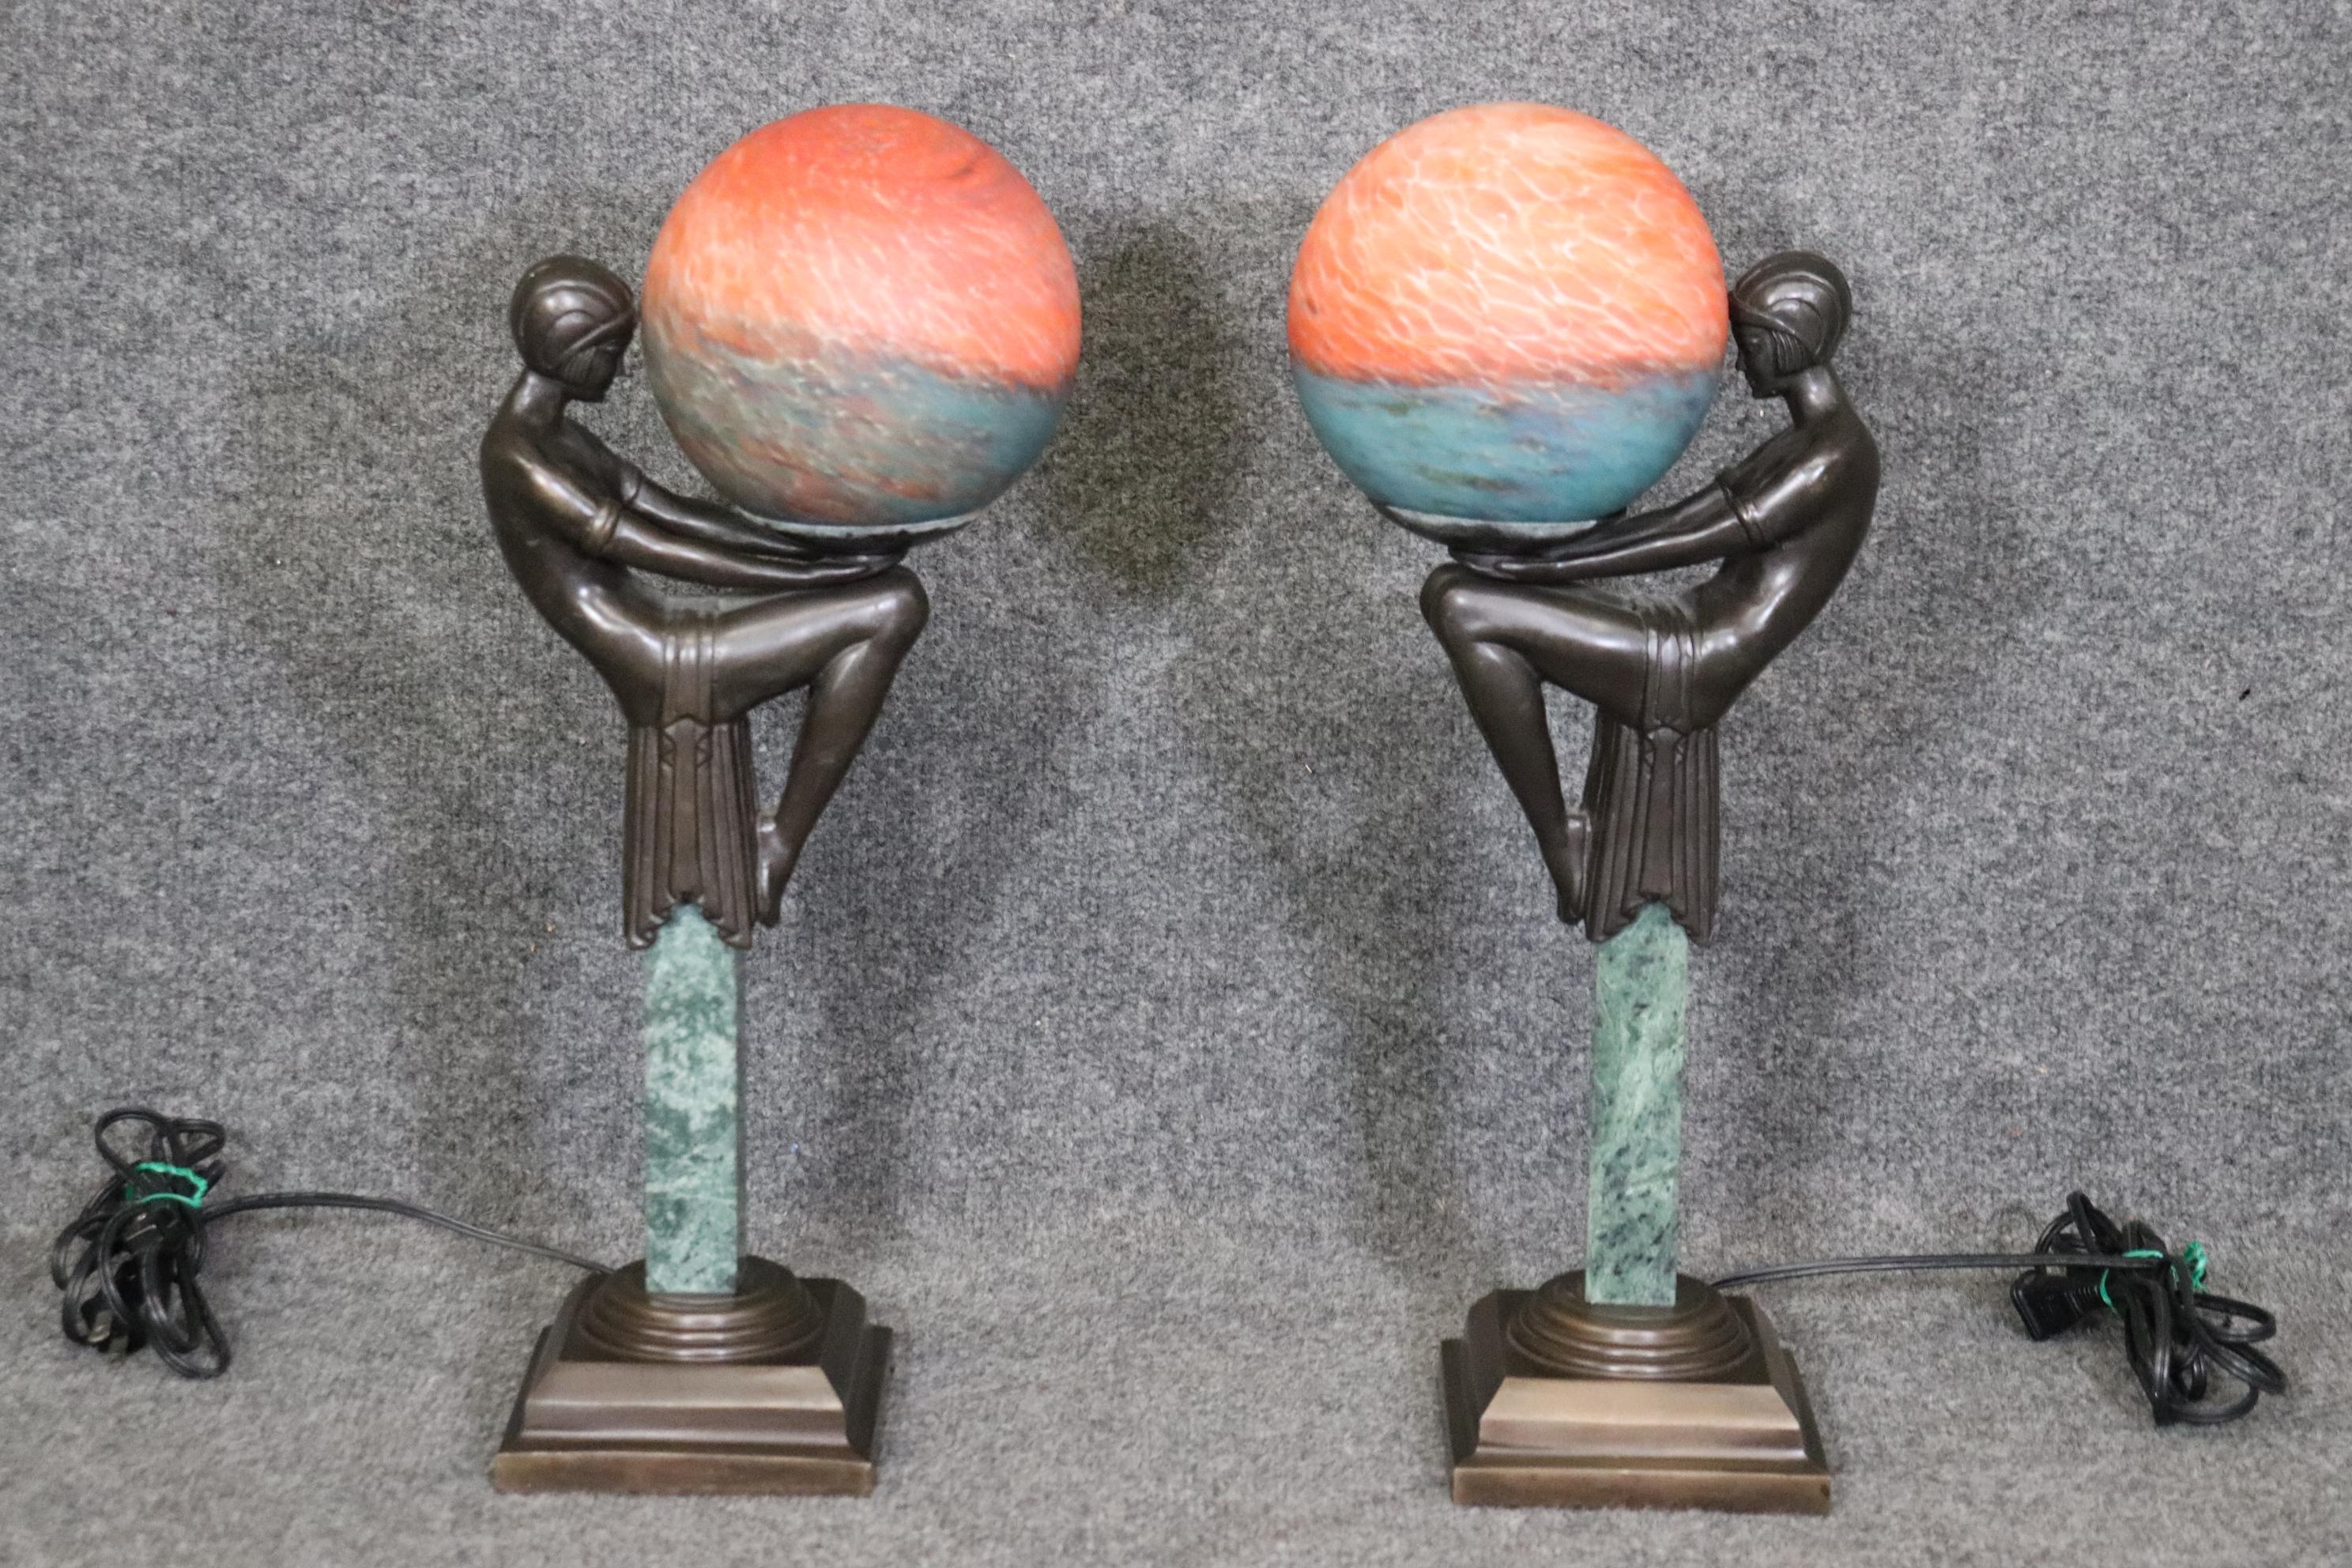 Dimensions- H: 18 3/4in W: 8 1/4in D: 5 1/4in 

This vintage Mid Century pair of Art Deco figural dancer table lamps with art glass shades is truly an interesting example of minimalistic yet luxurious decor. This pair of lamps are crafted of the